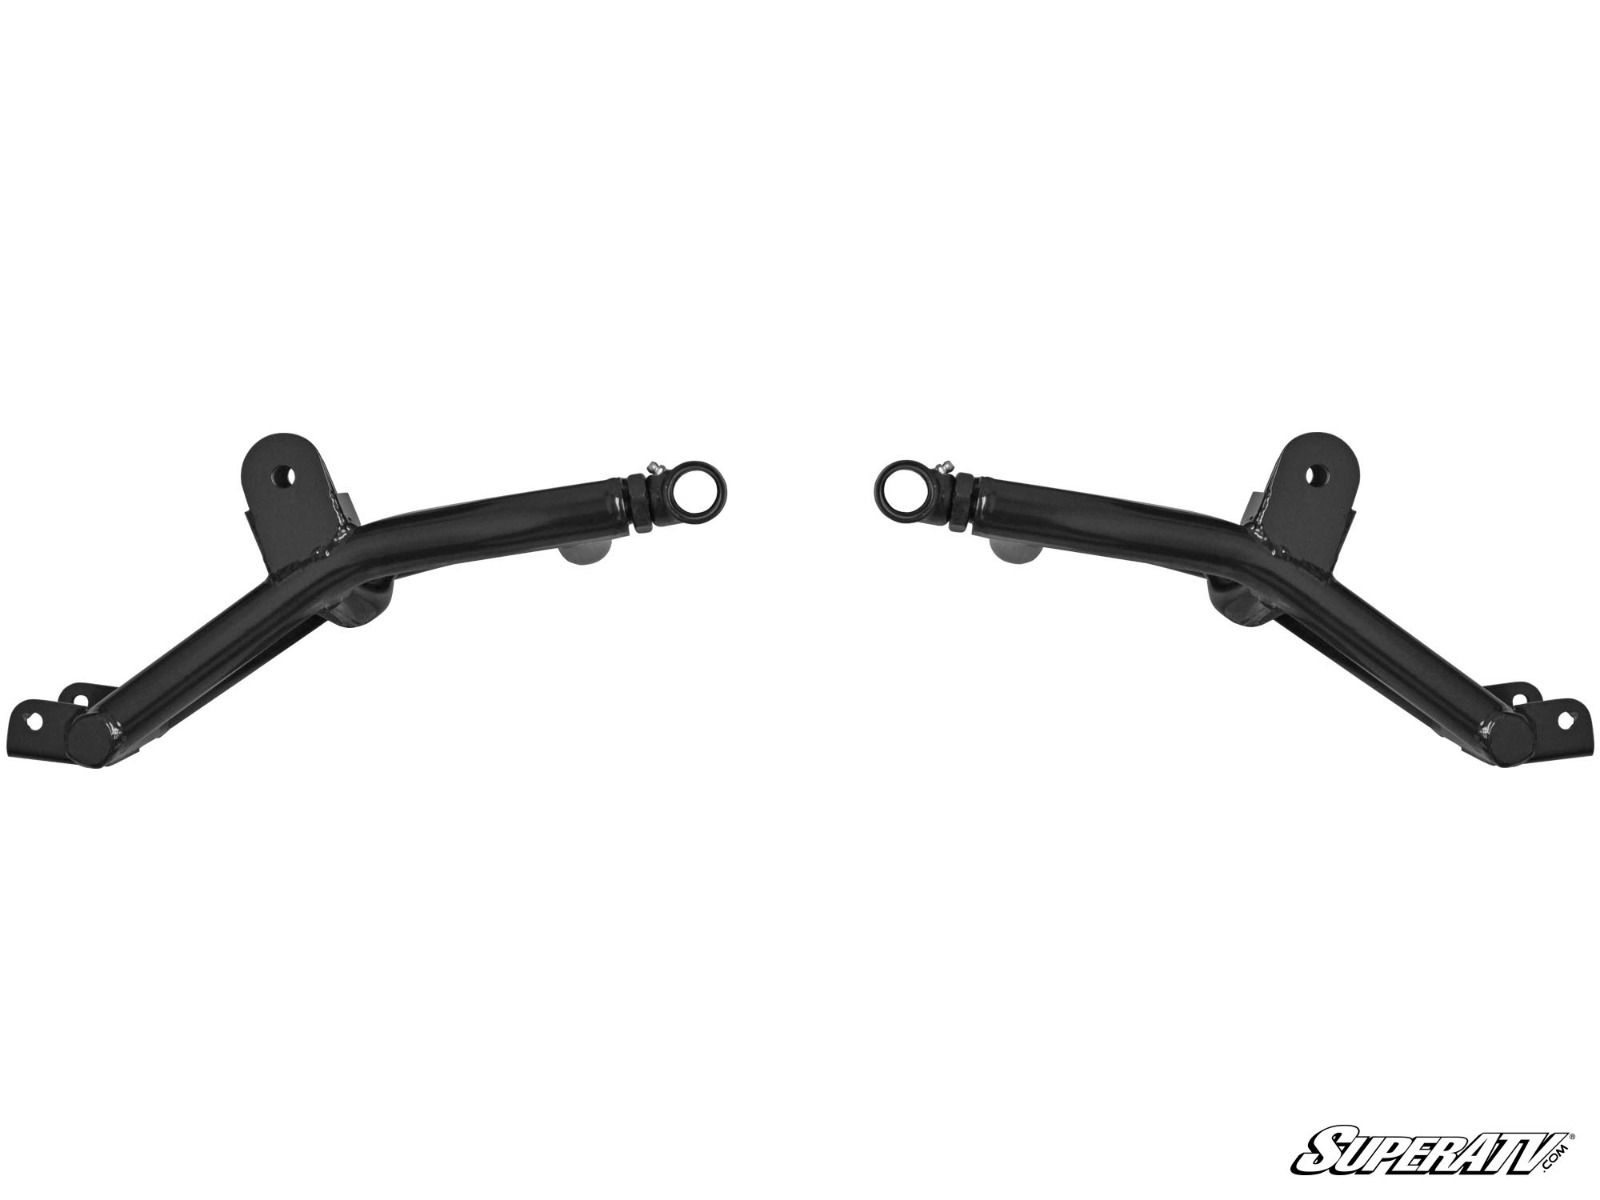 High Clearance 1.5" Rear Offset Rear A-Arms - Black - For 12-21 Kawasaki Teryx - Click Image to Close